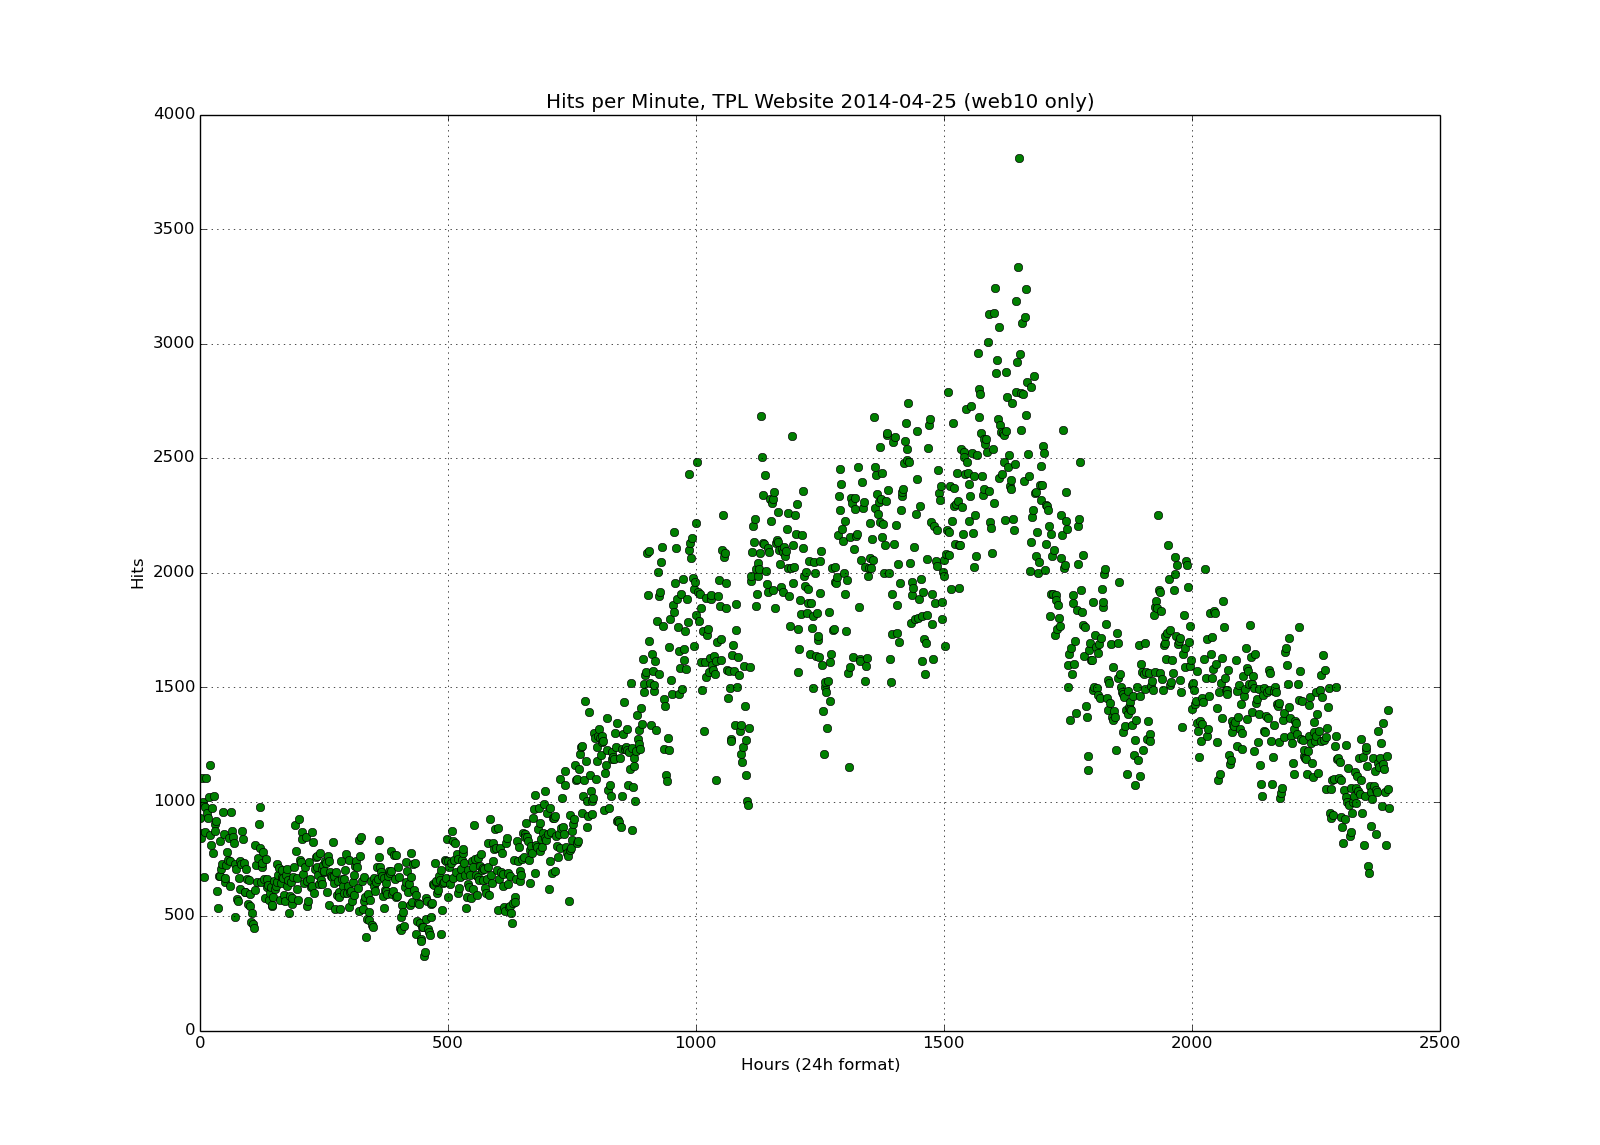 One day's dot plot showing hits per minute on a 25(!) hour scale